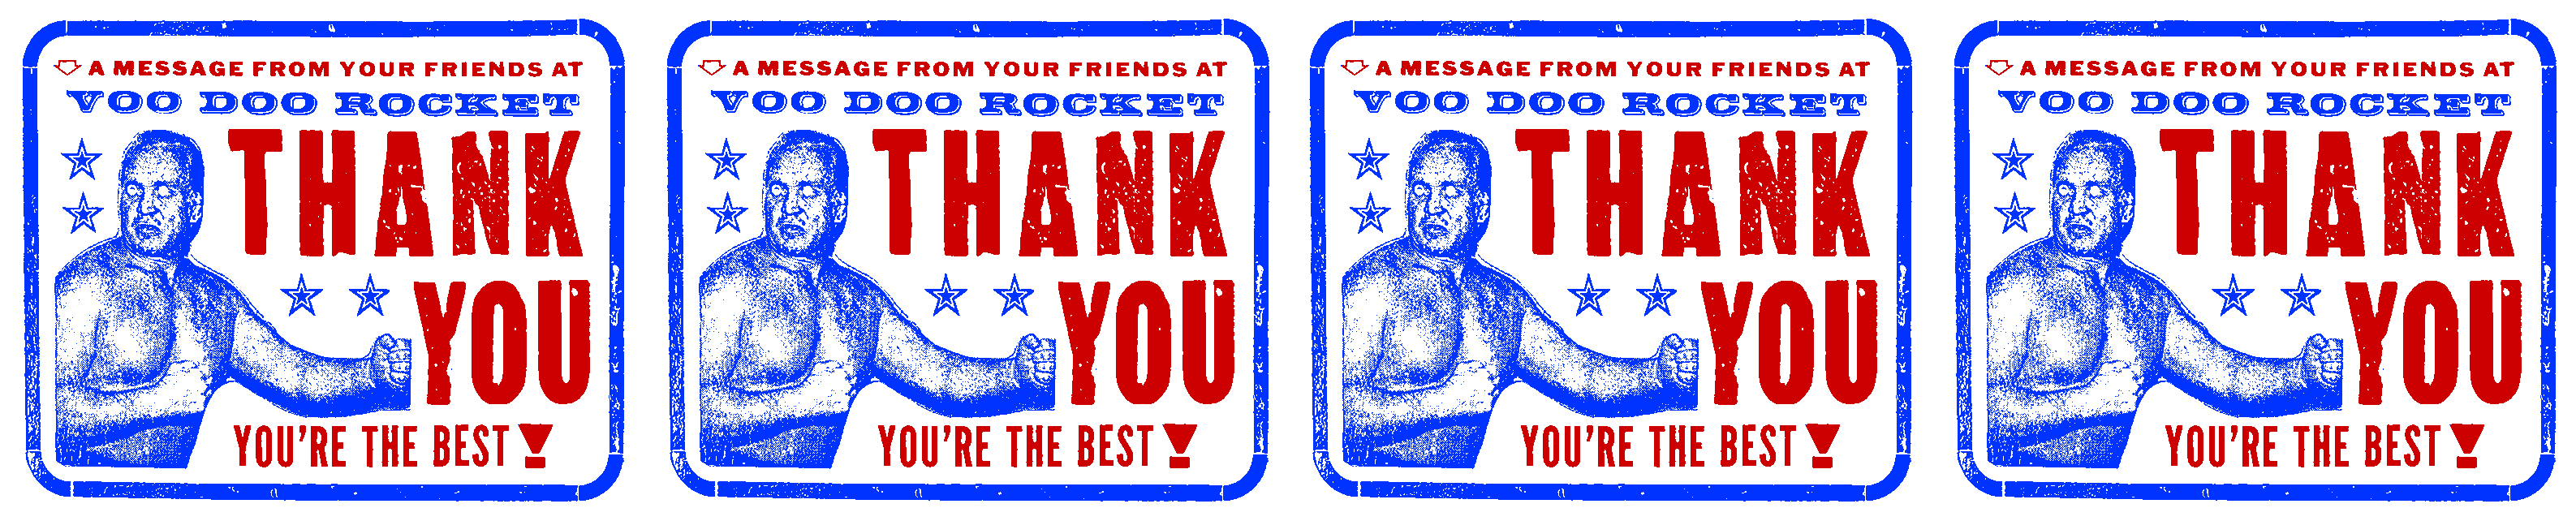 A message from your friends at Voo Doo Rocket. Thank you. You're the best!